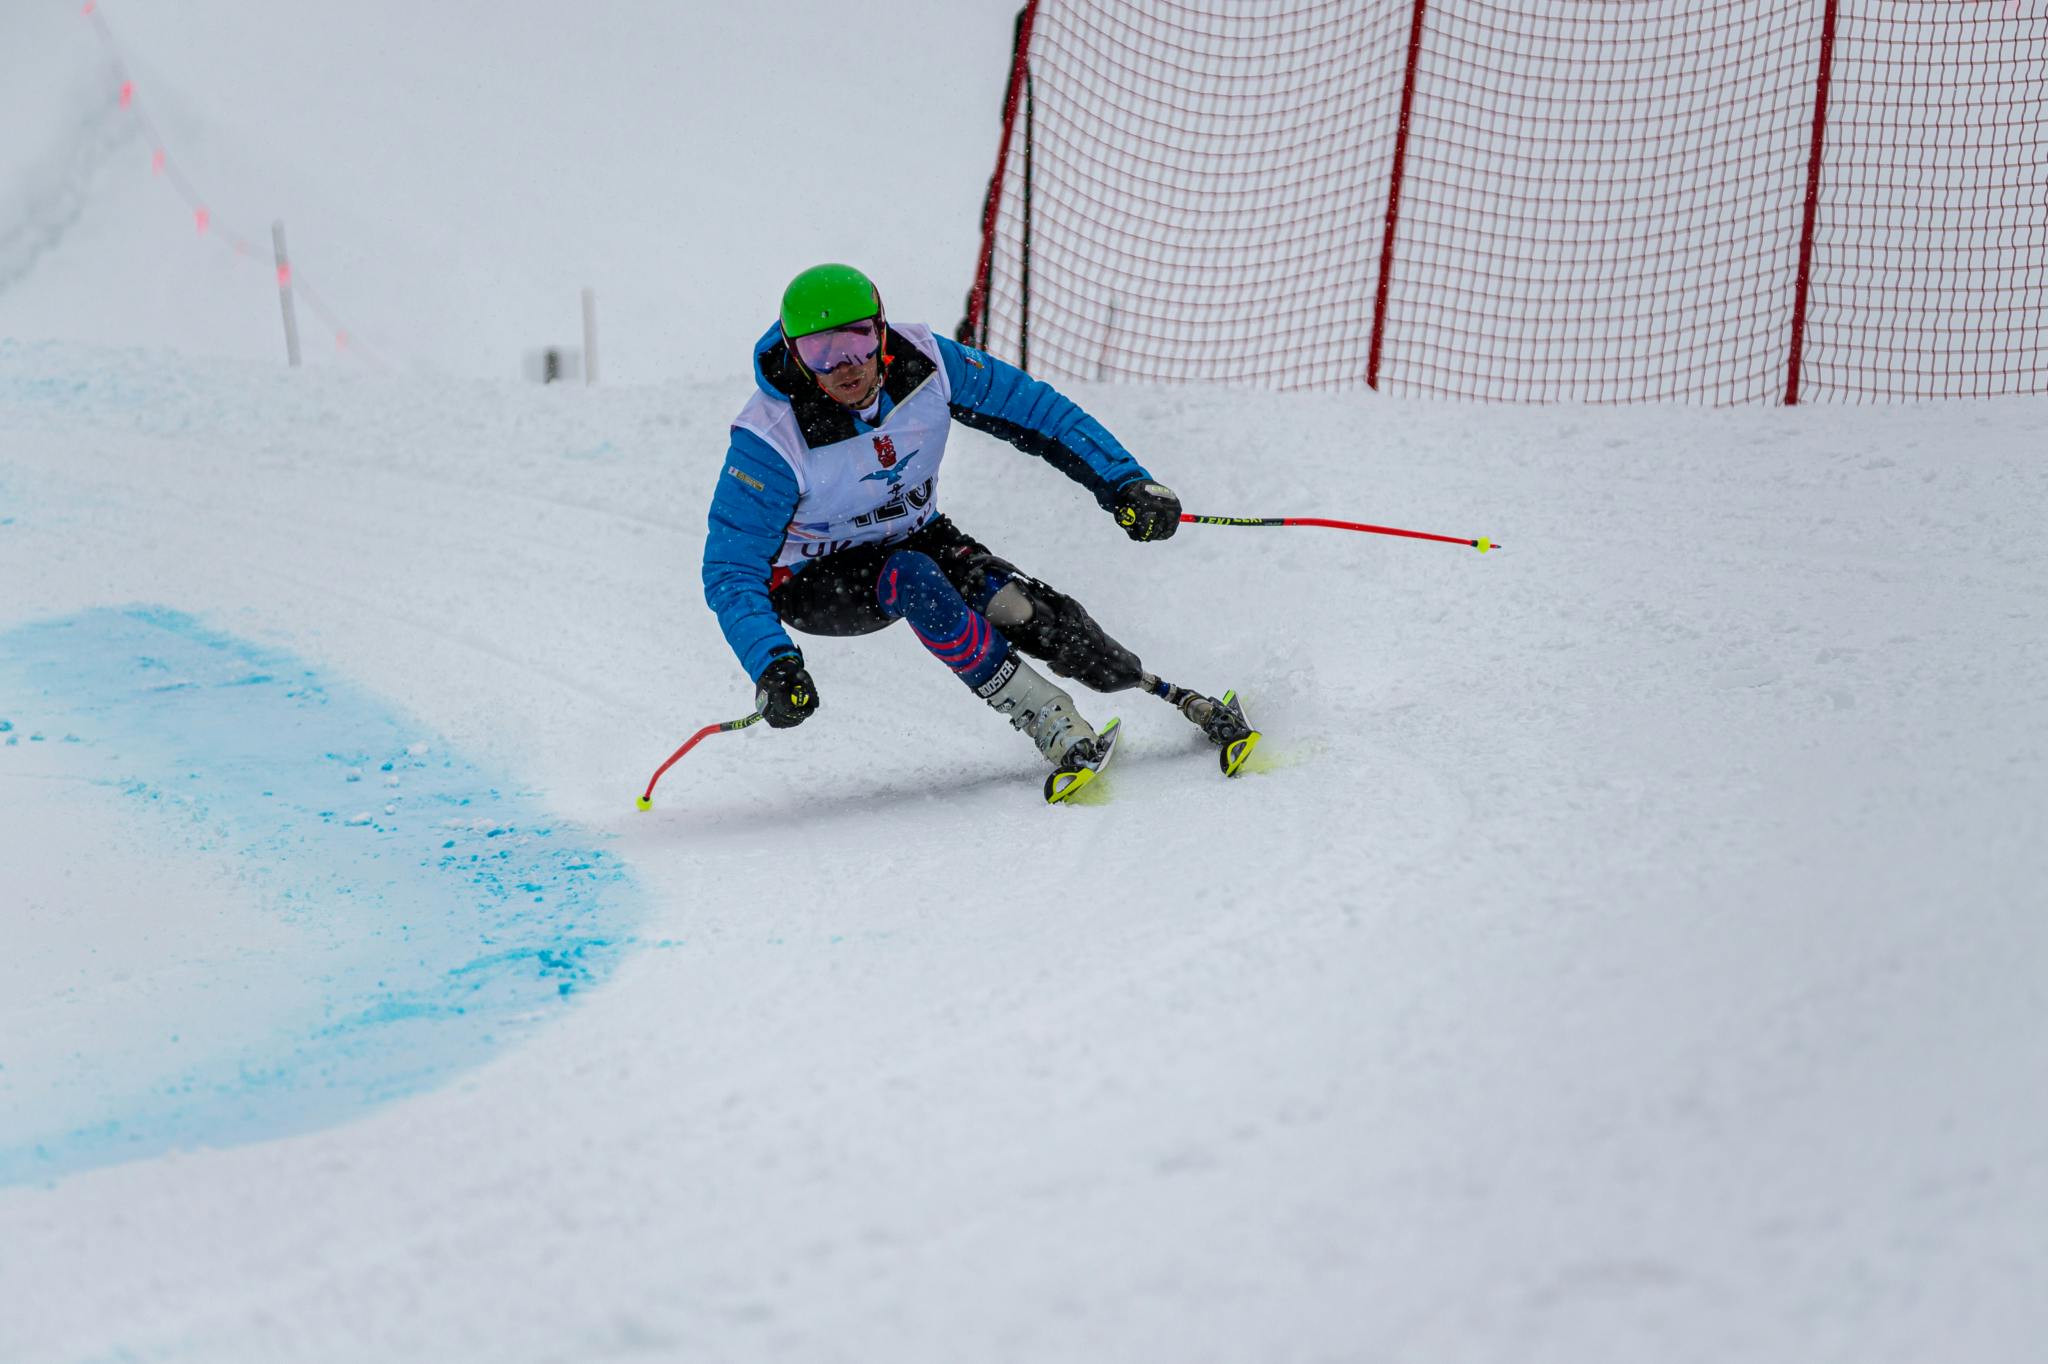 A skier from the Armed Forces Para-Snowsport team crouches low as they turn around a bend on a snowy slope